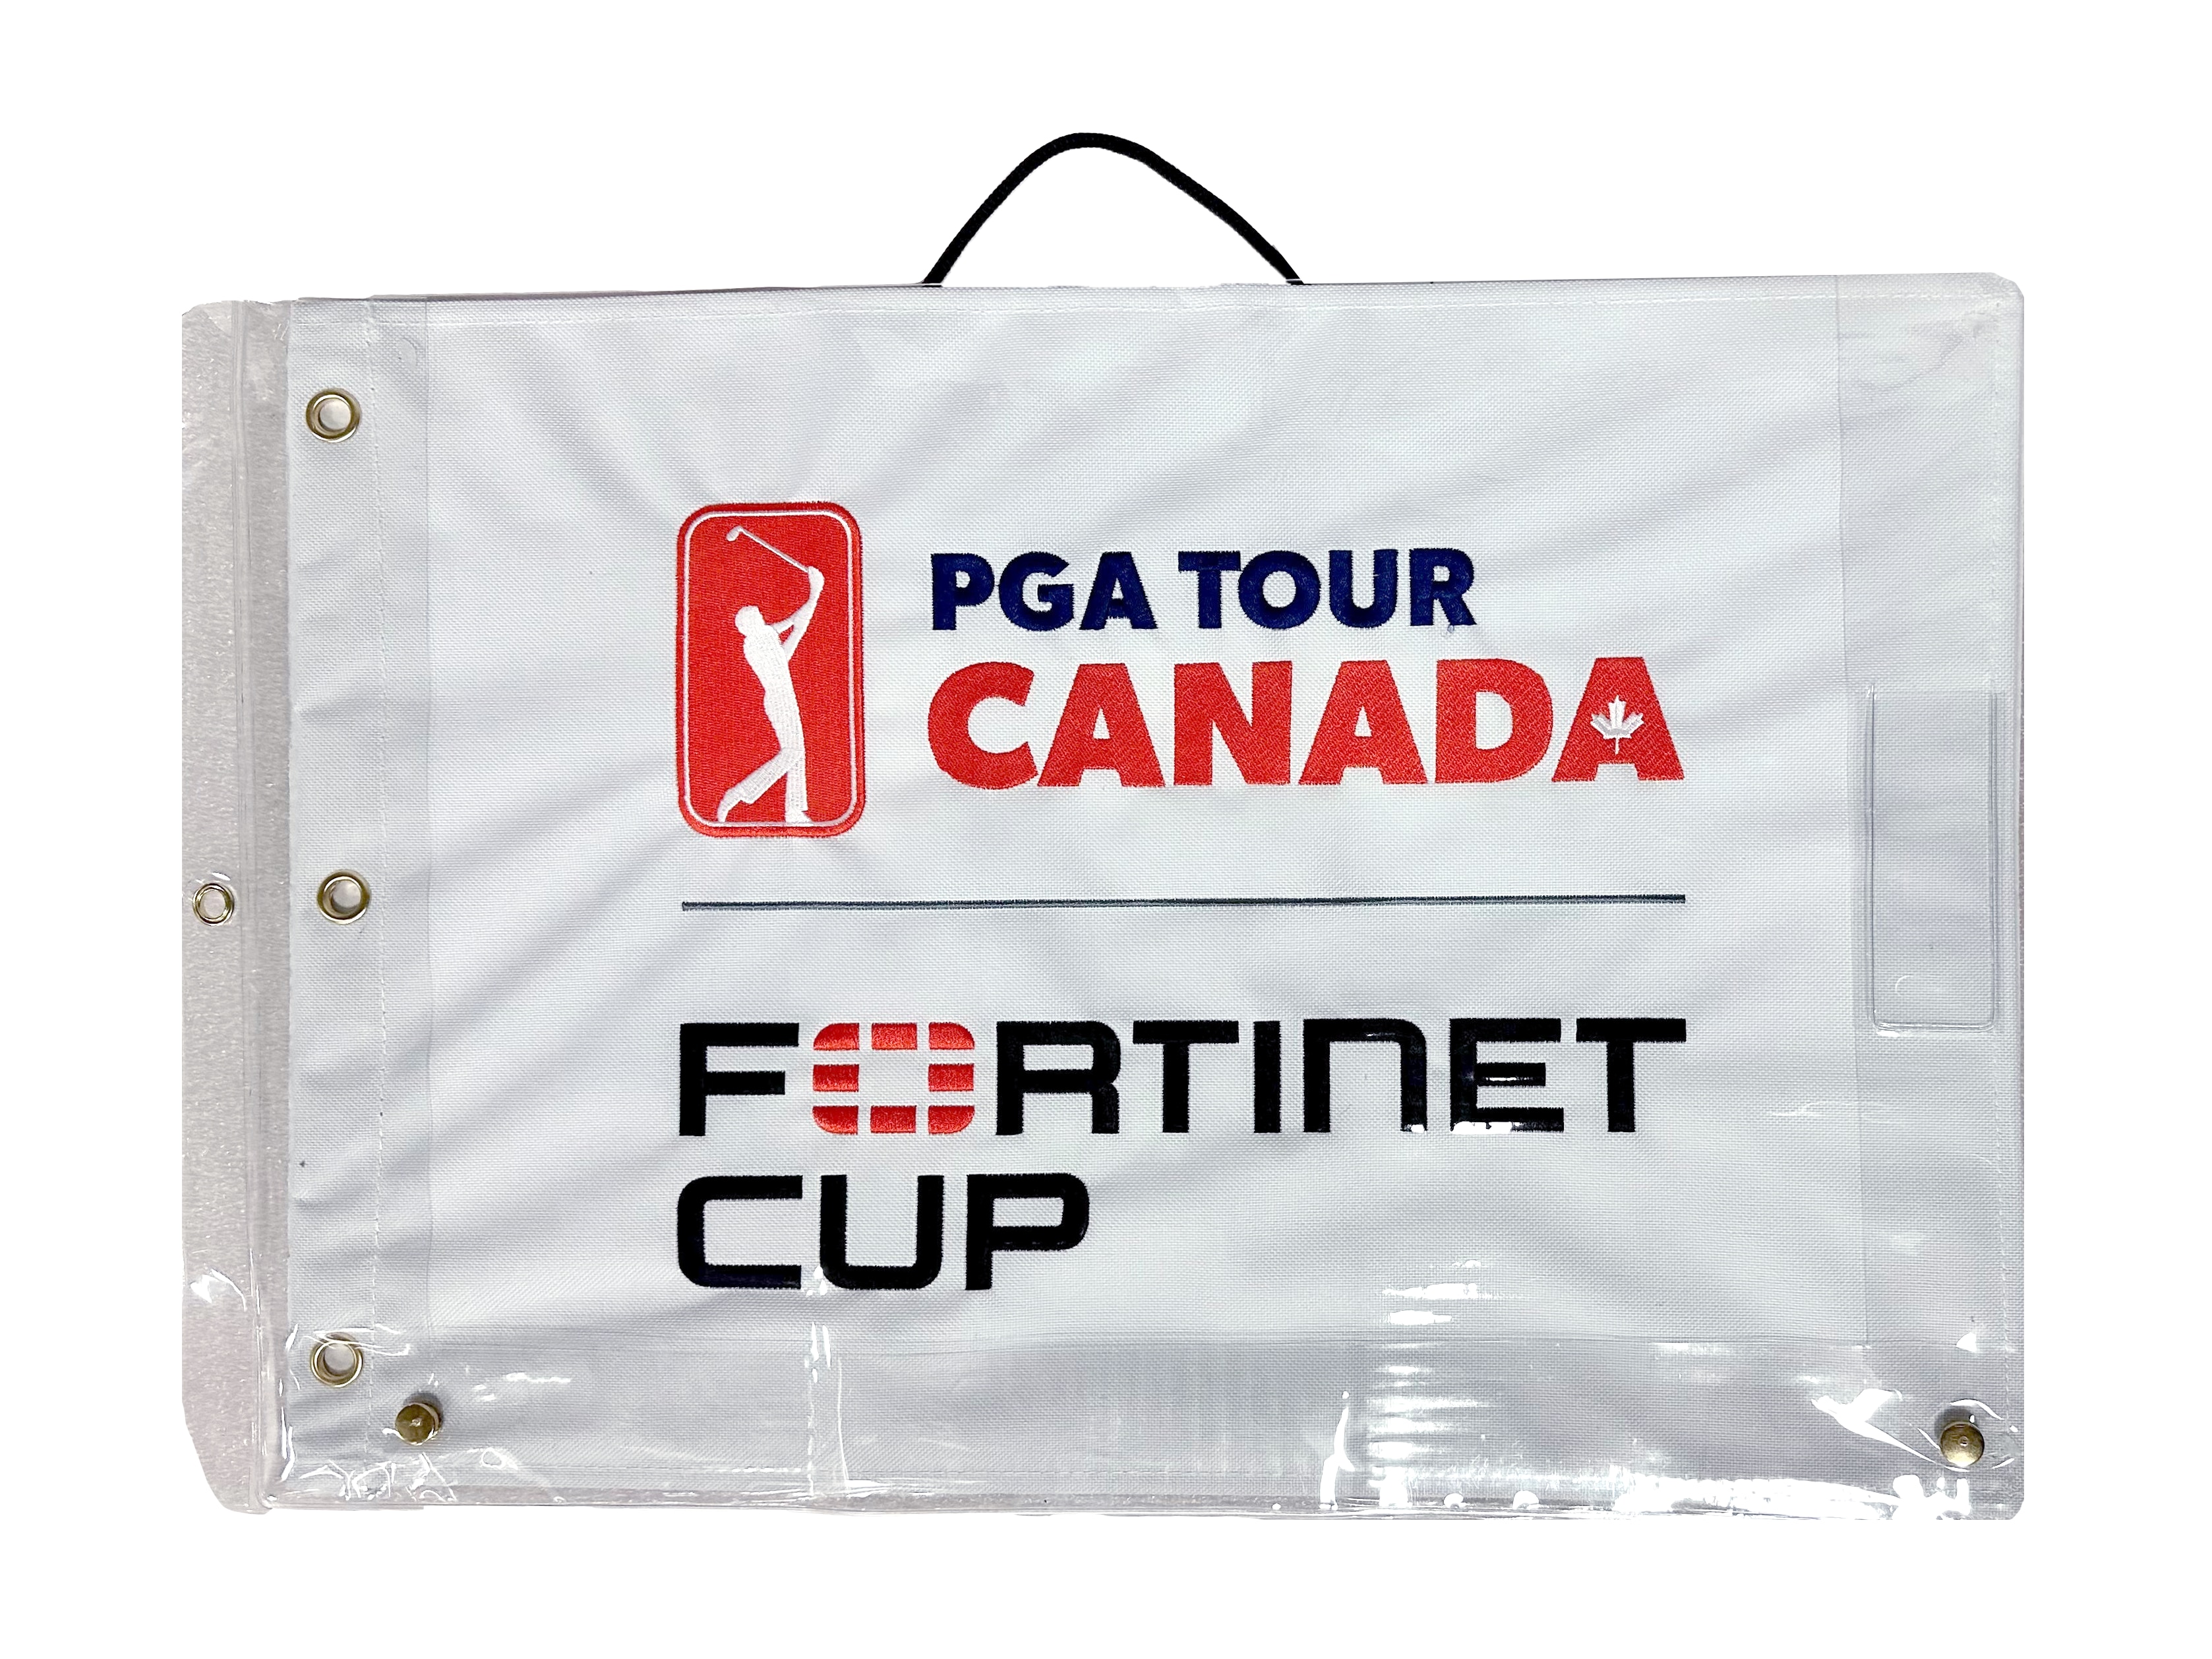 Fortinet Cup Pin Flag